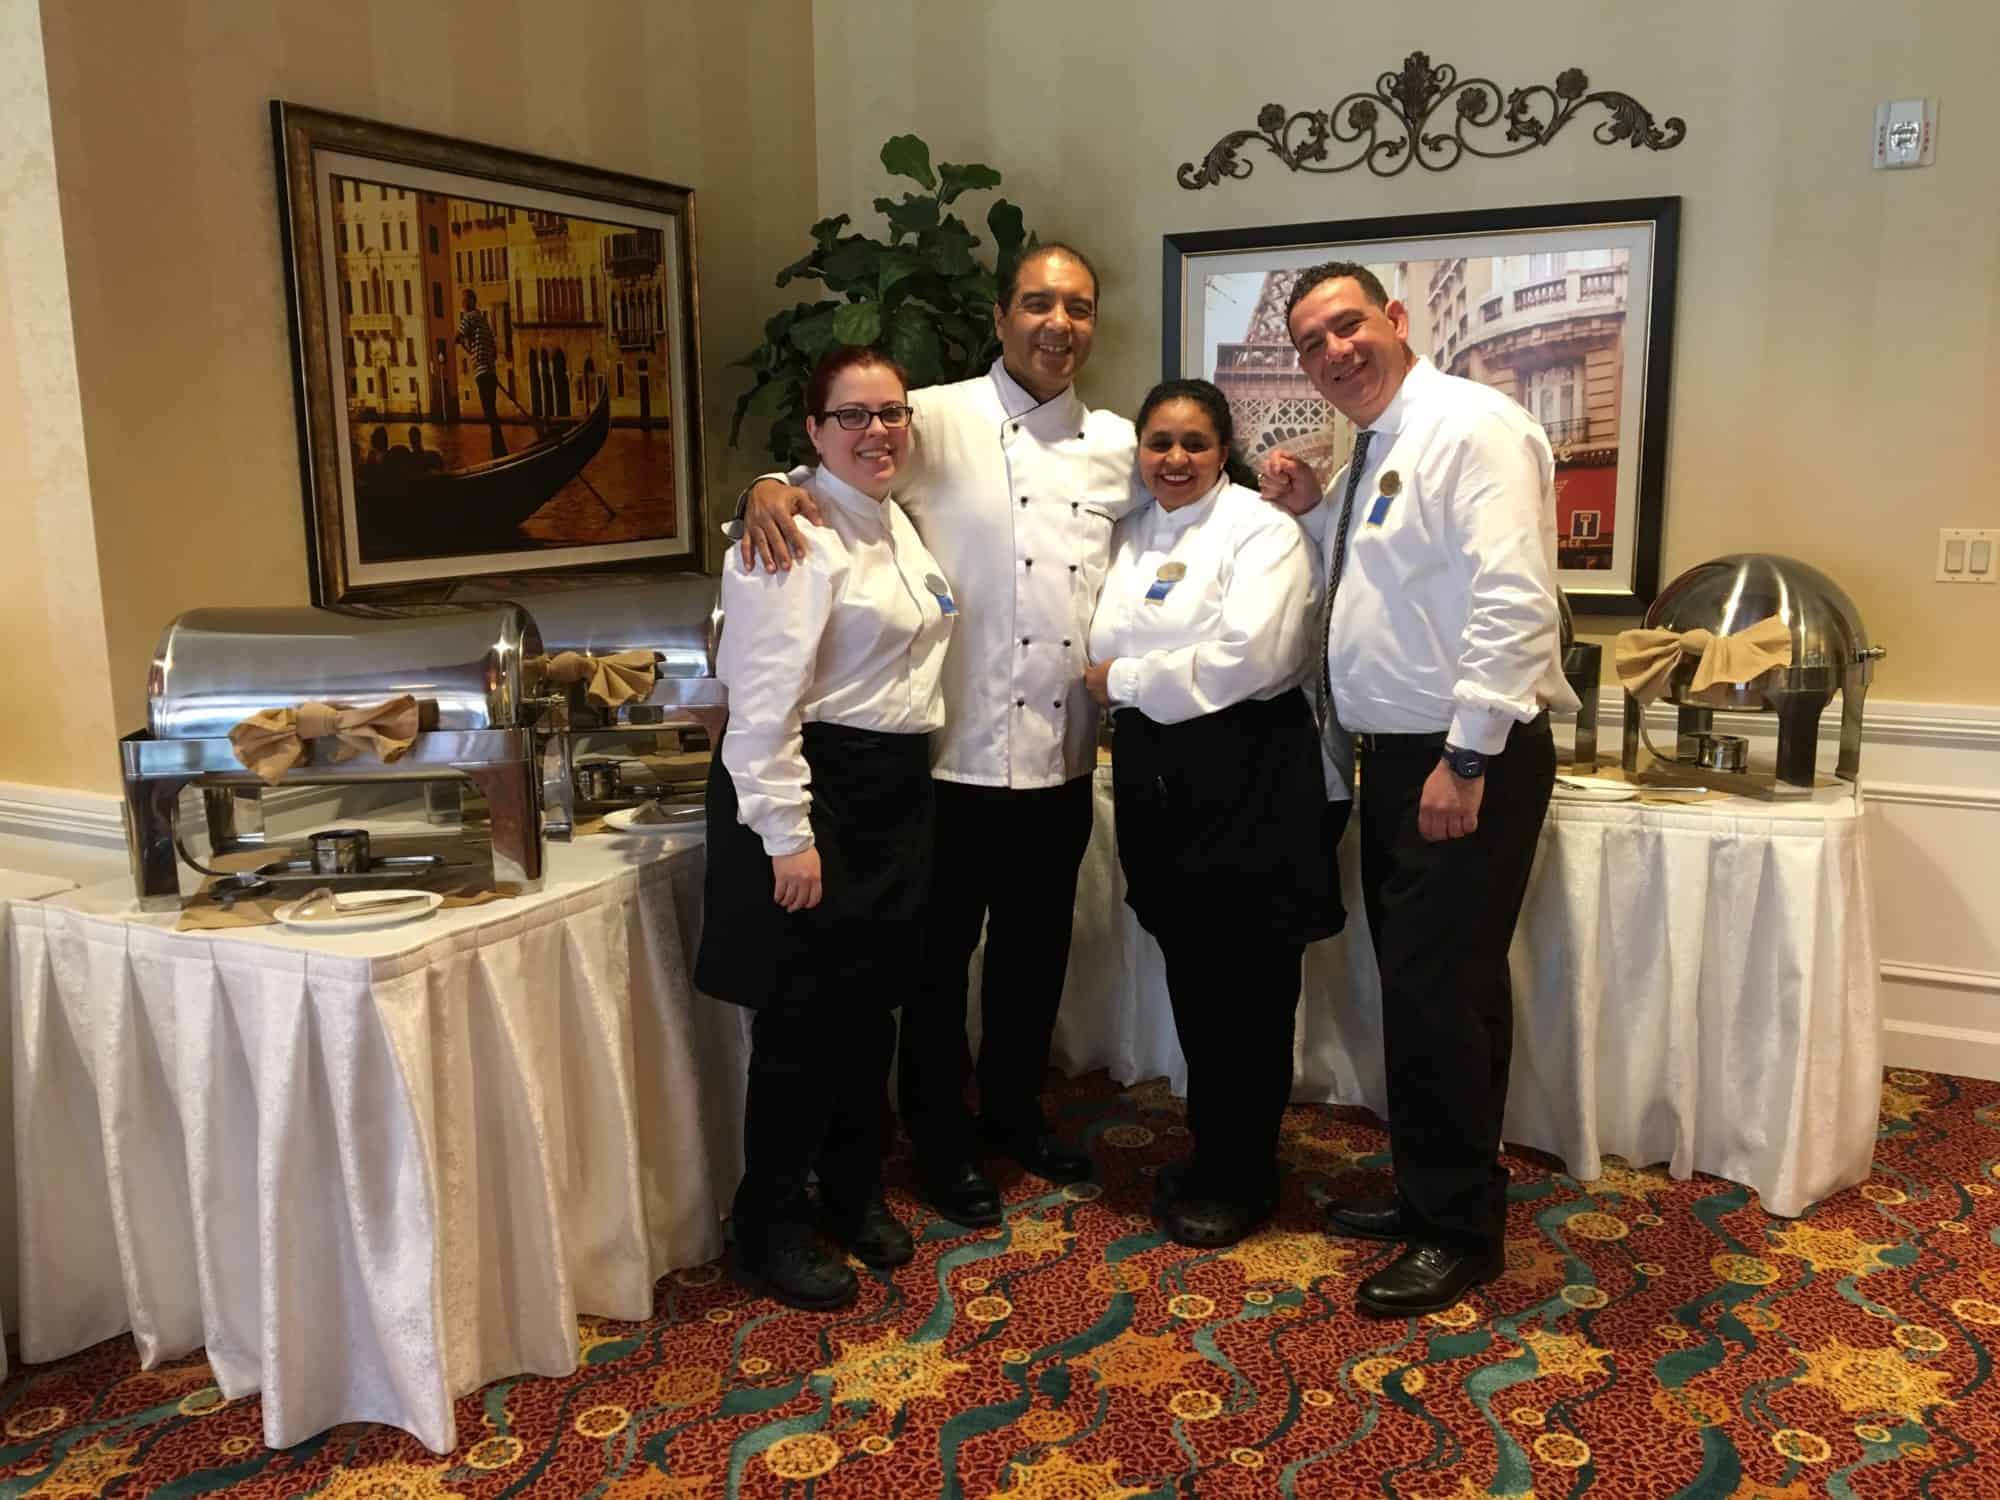 Samir and dining team in front of Buffet.